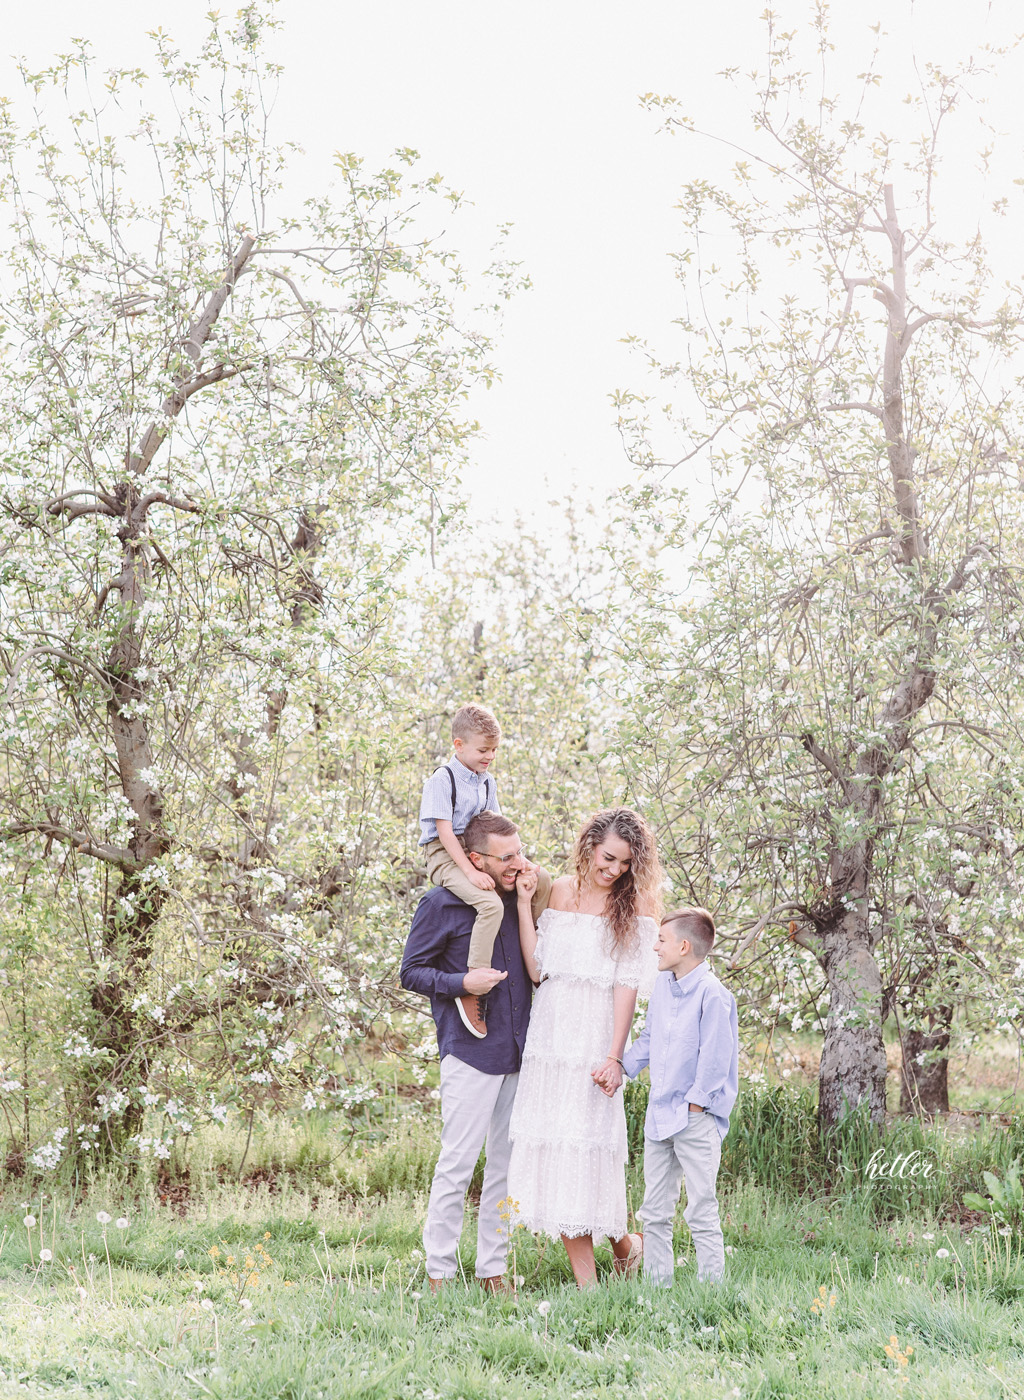 Grand Rapids Michigan spring family photo session at an apple orchard full of apple blossoms